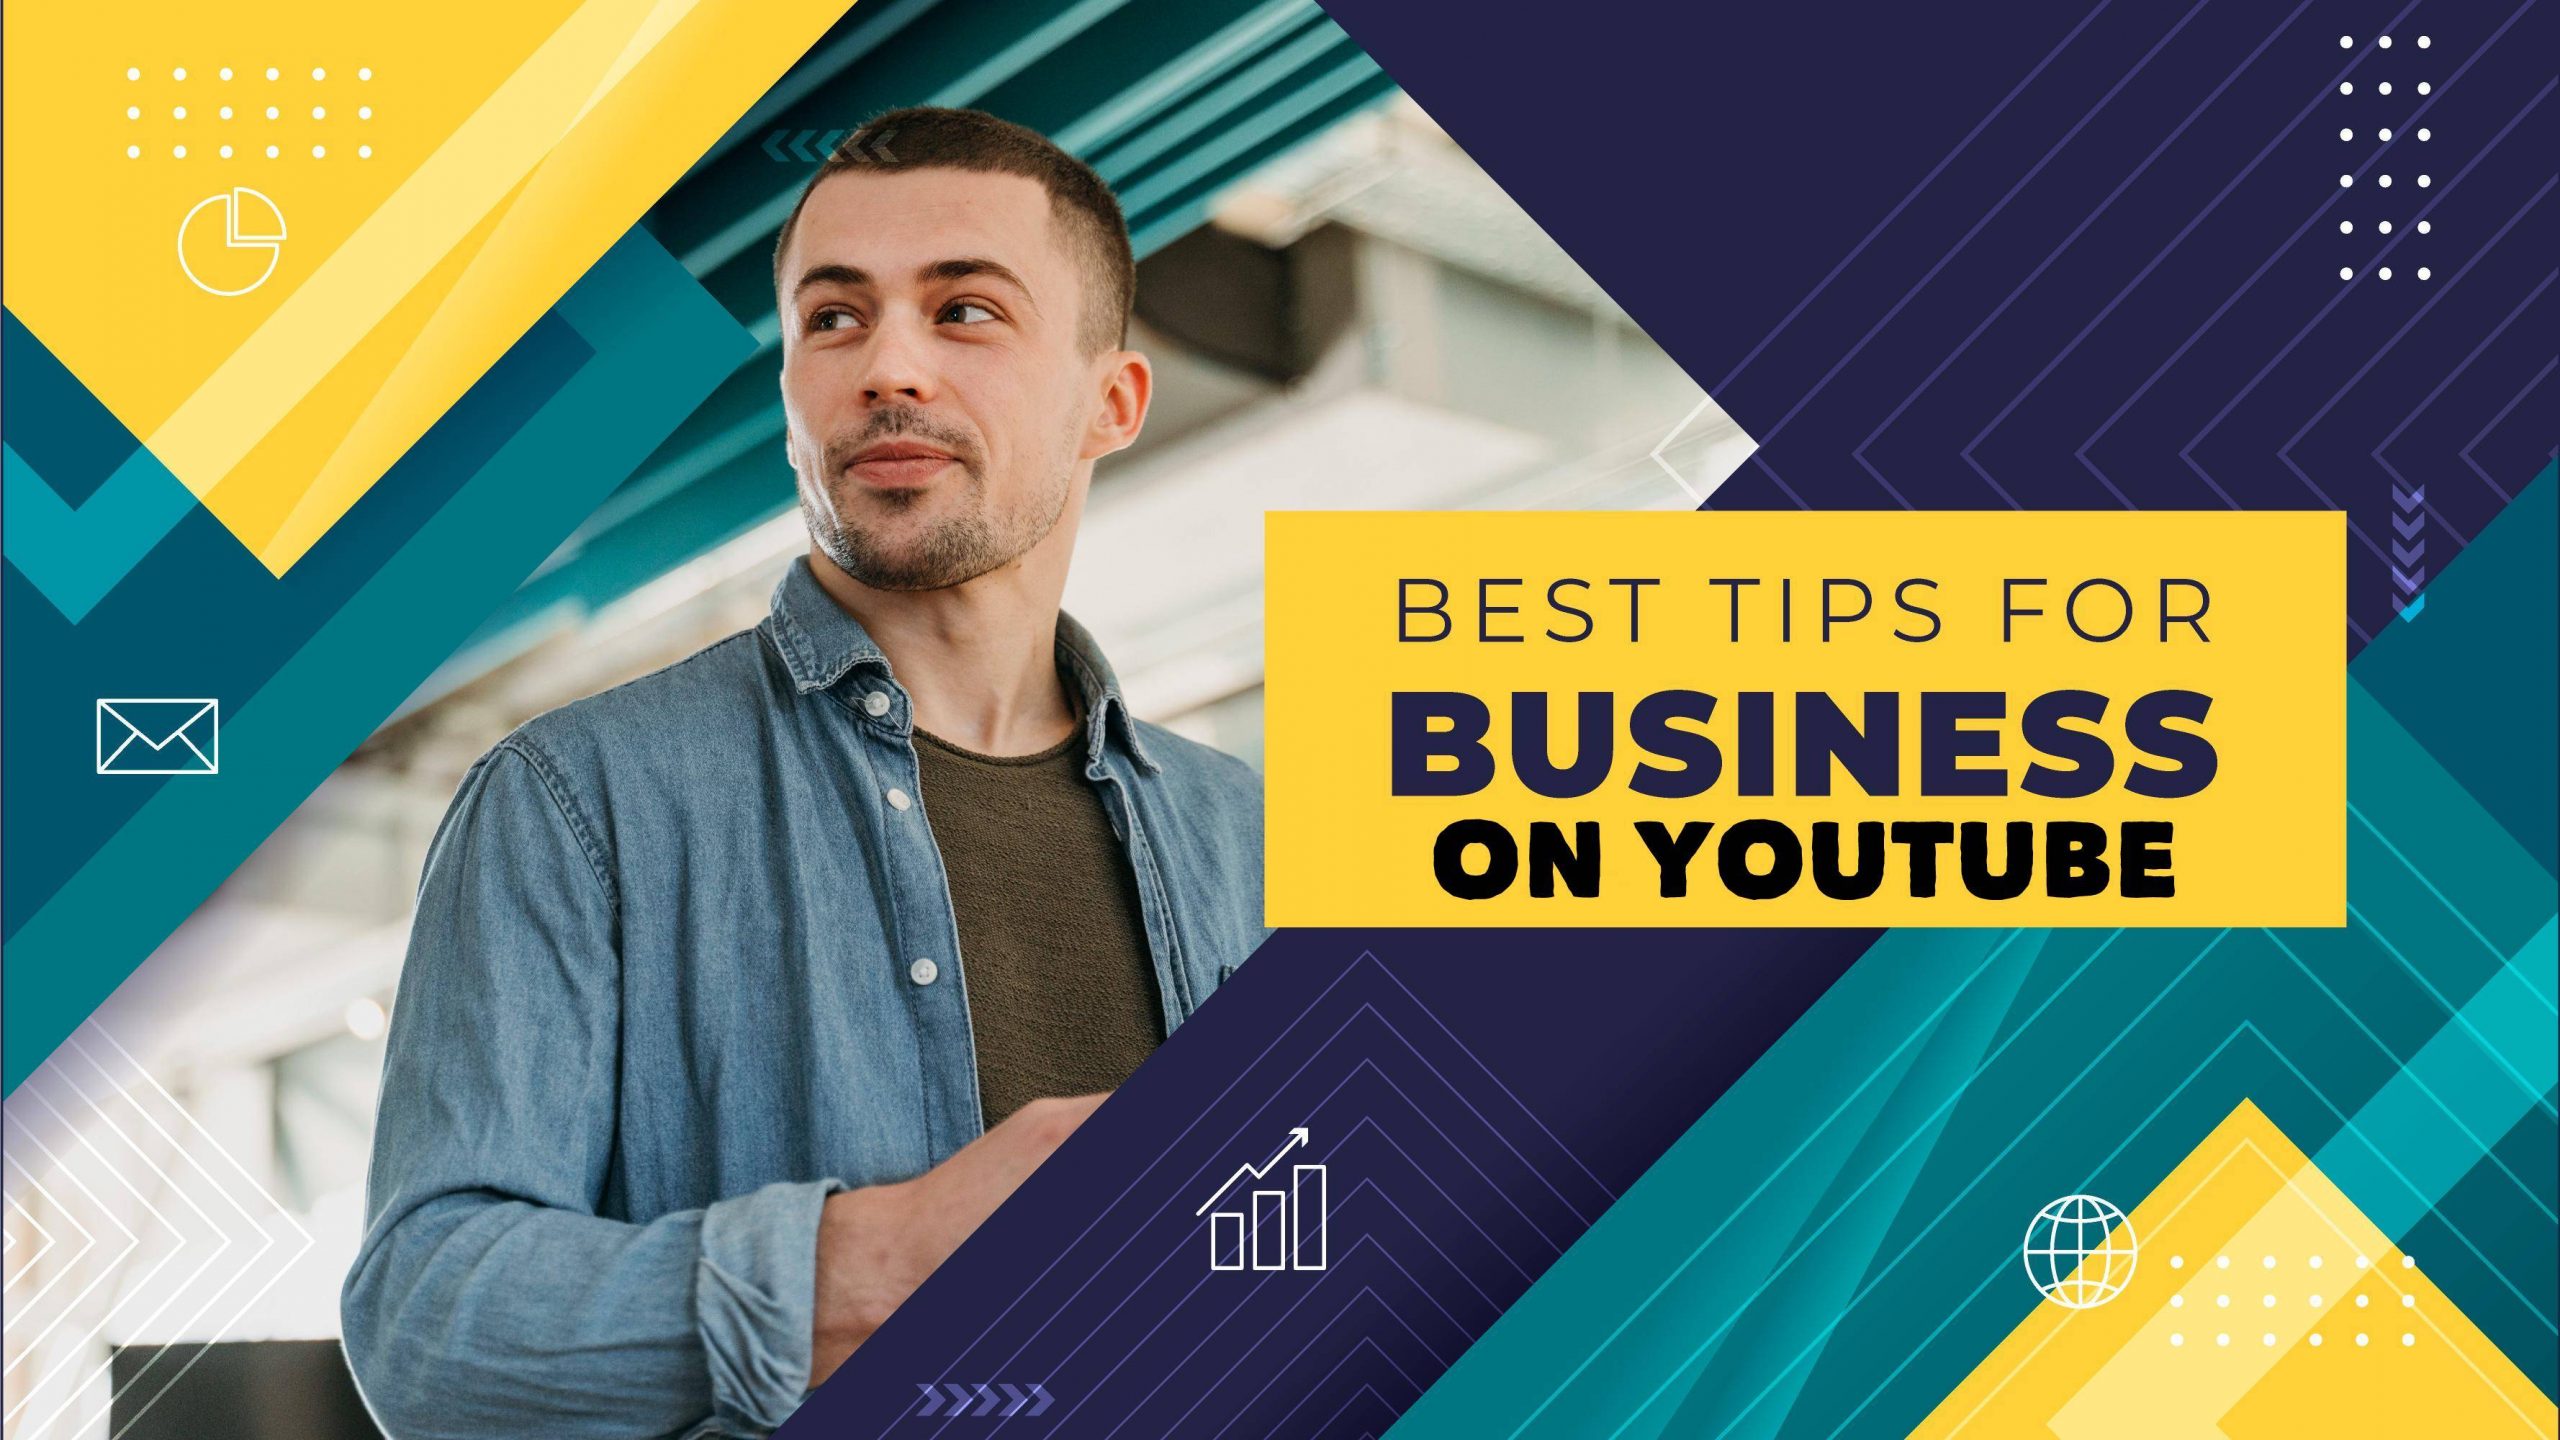 How to Grow your Business through YouTube